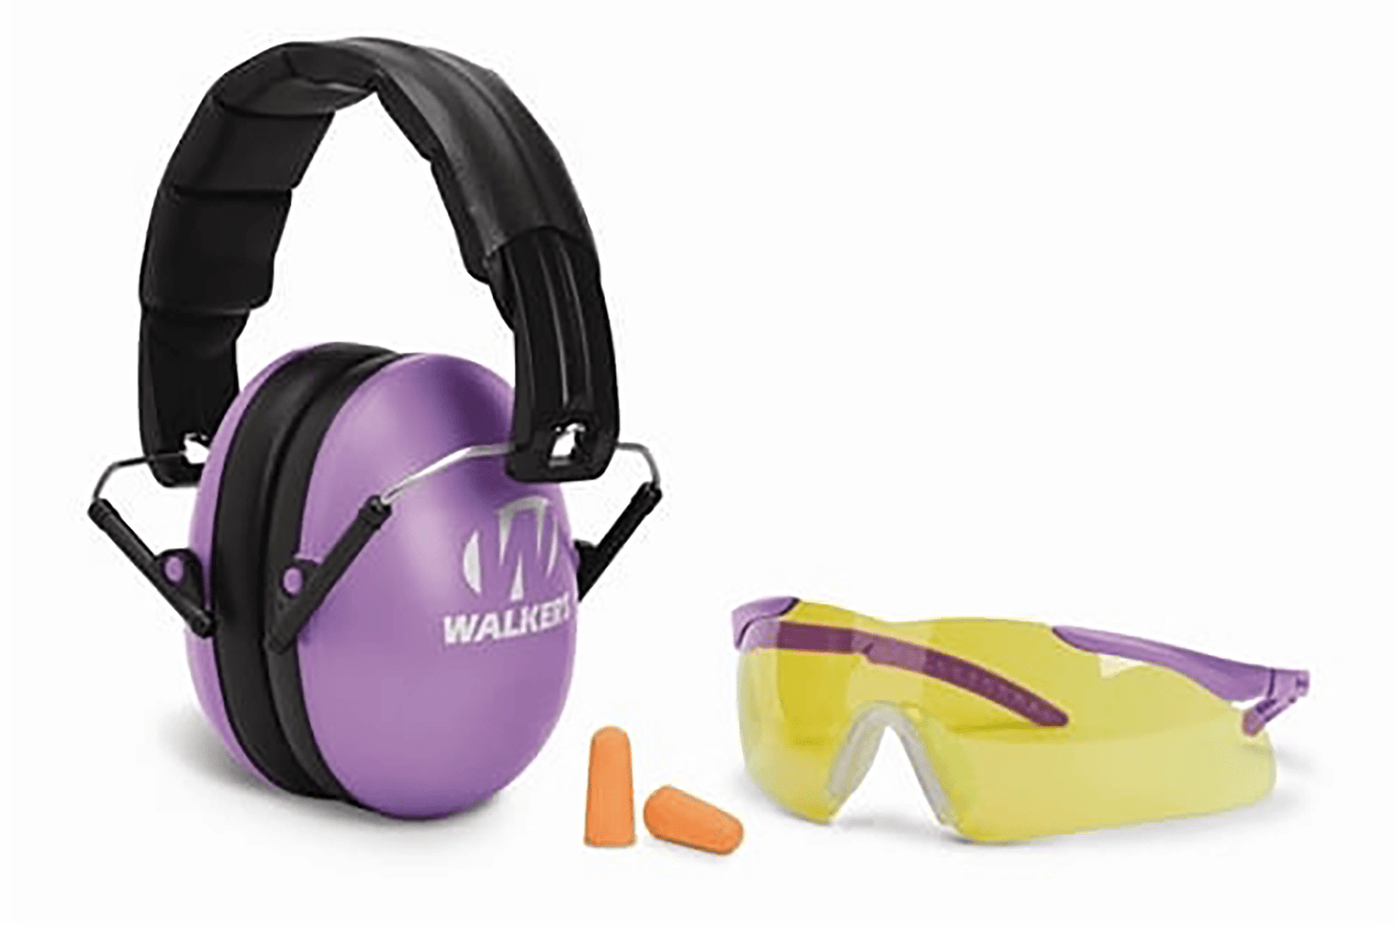 Walkers Walkers Muff Shooting Passive - Youth Glasses/plugs 27db Purp Hearing And Eye Protection